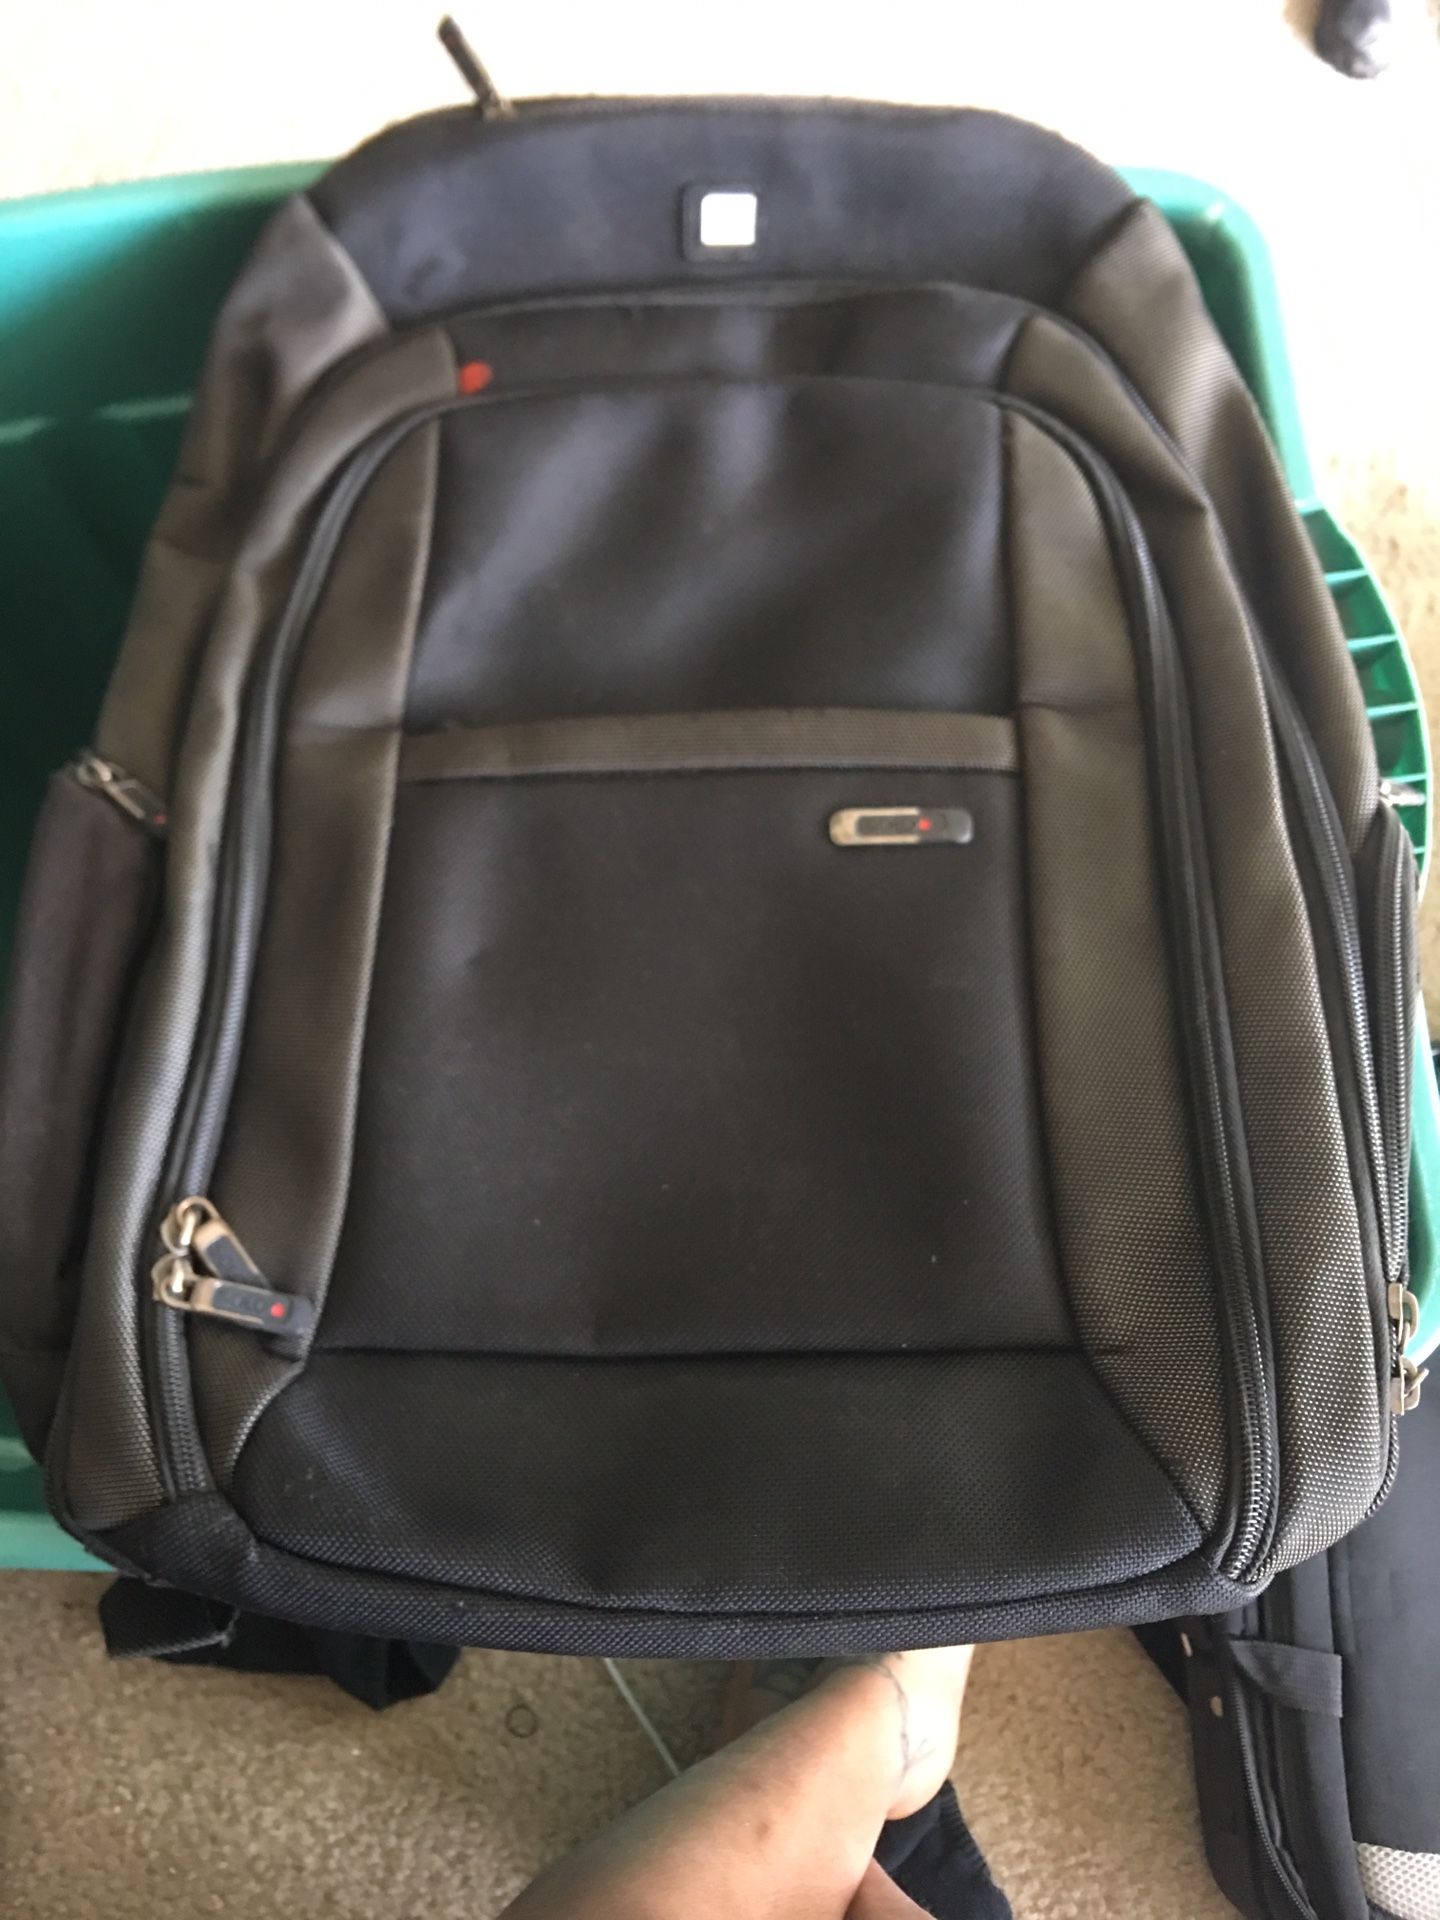 Solo computer backpack. With removable sleeve for computer or laptop